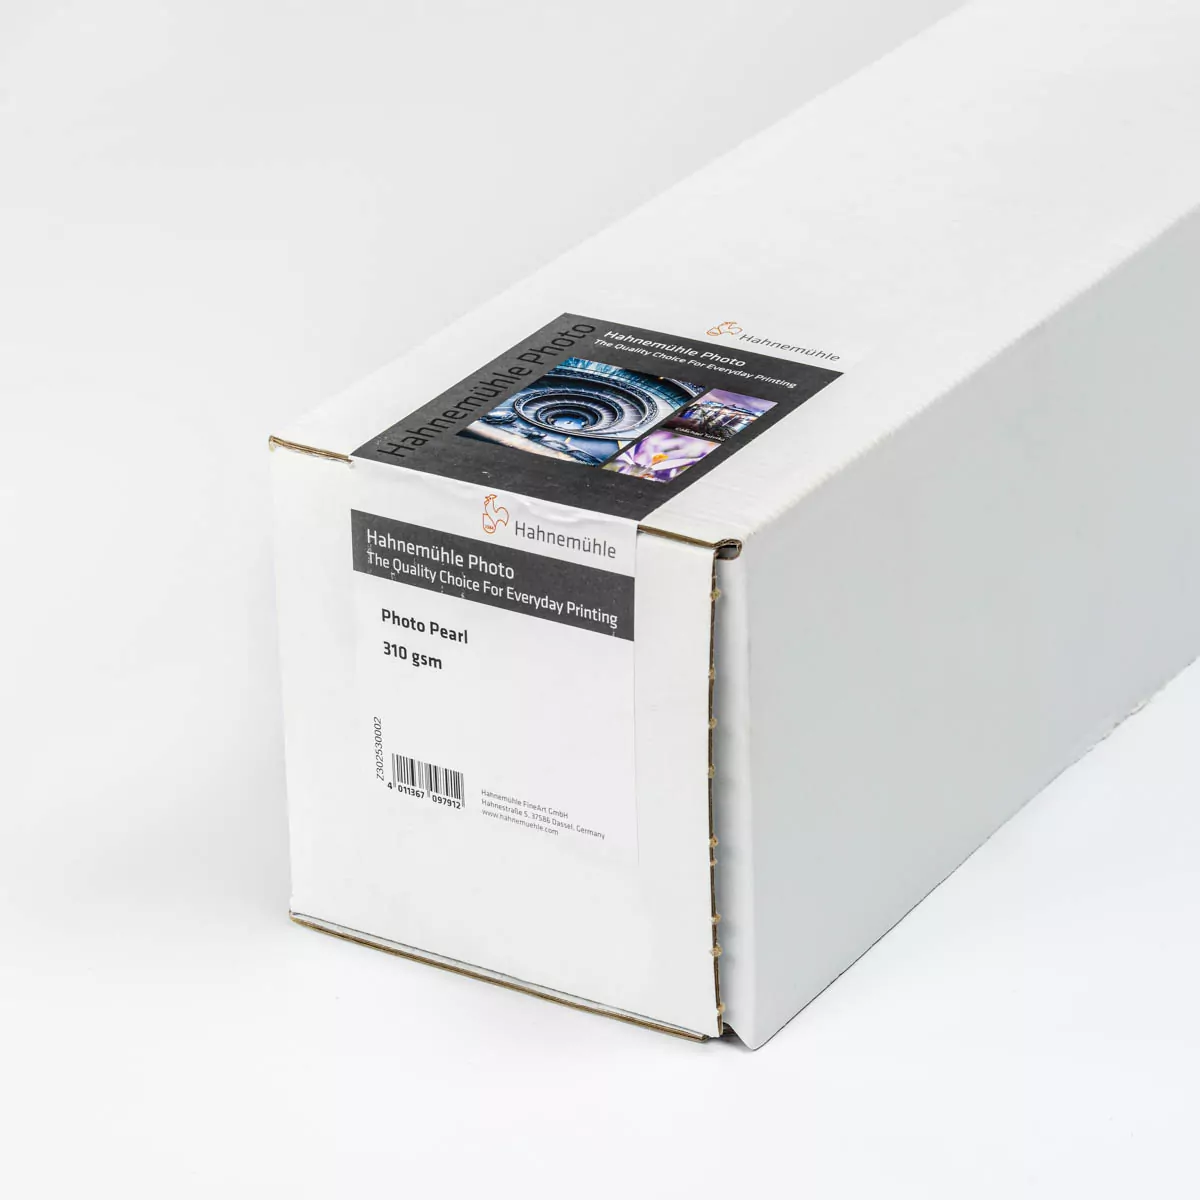 Hahnemuhle PhotoPearl 310 gsm 44"(111cm)x25m roll